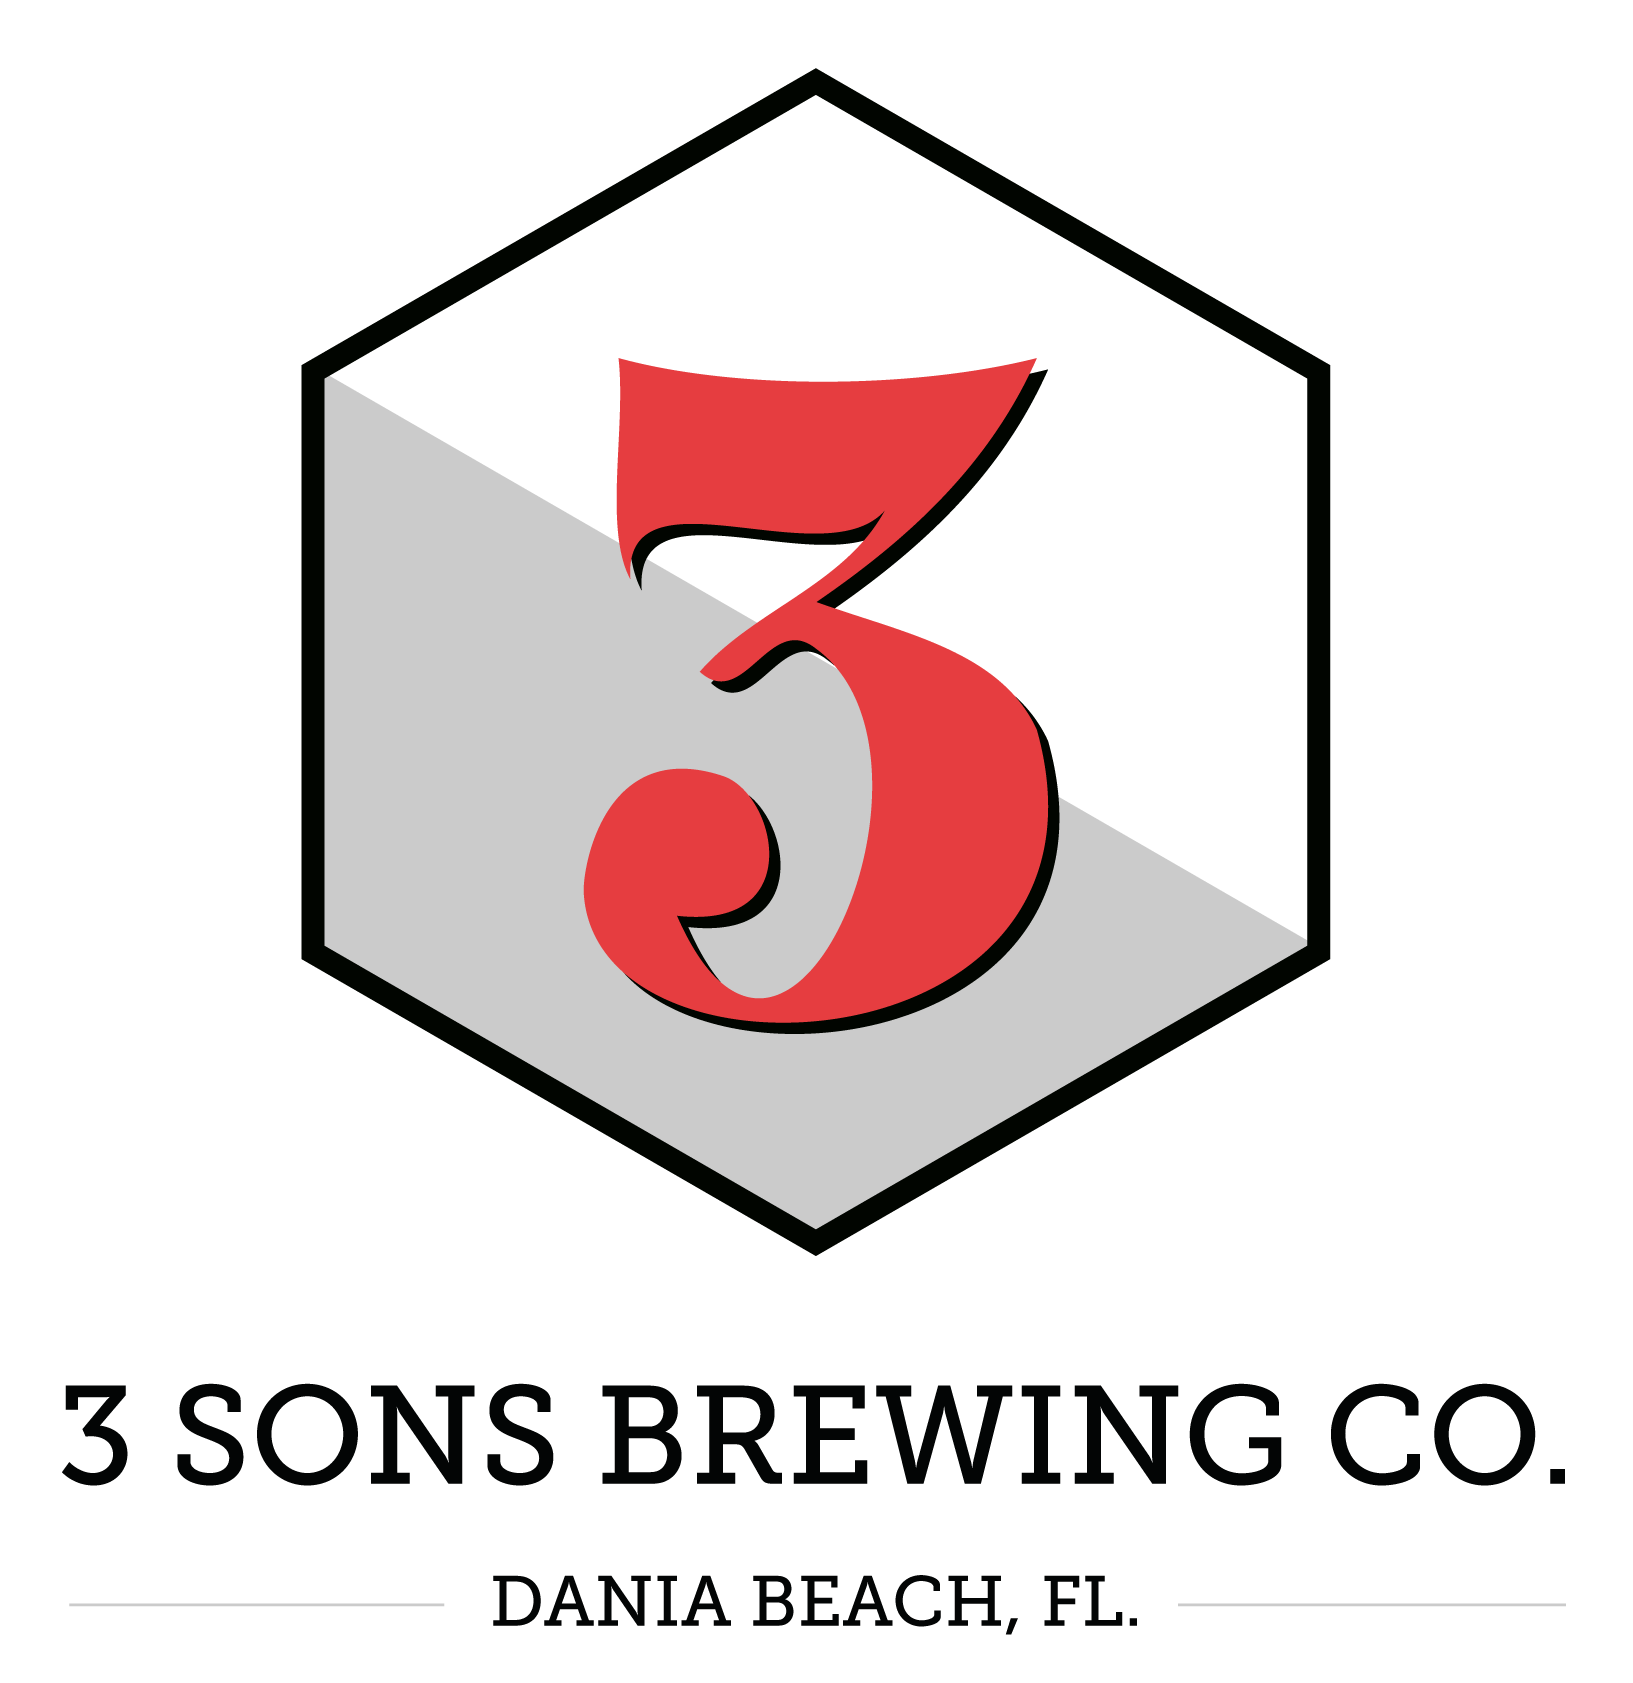 3 Sons Brewing